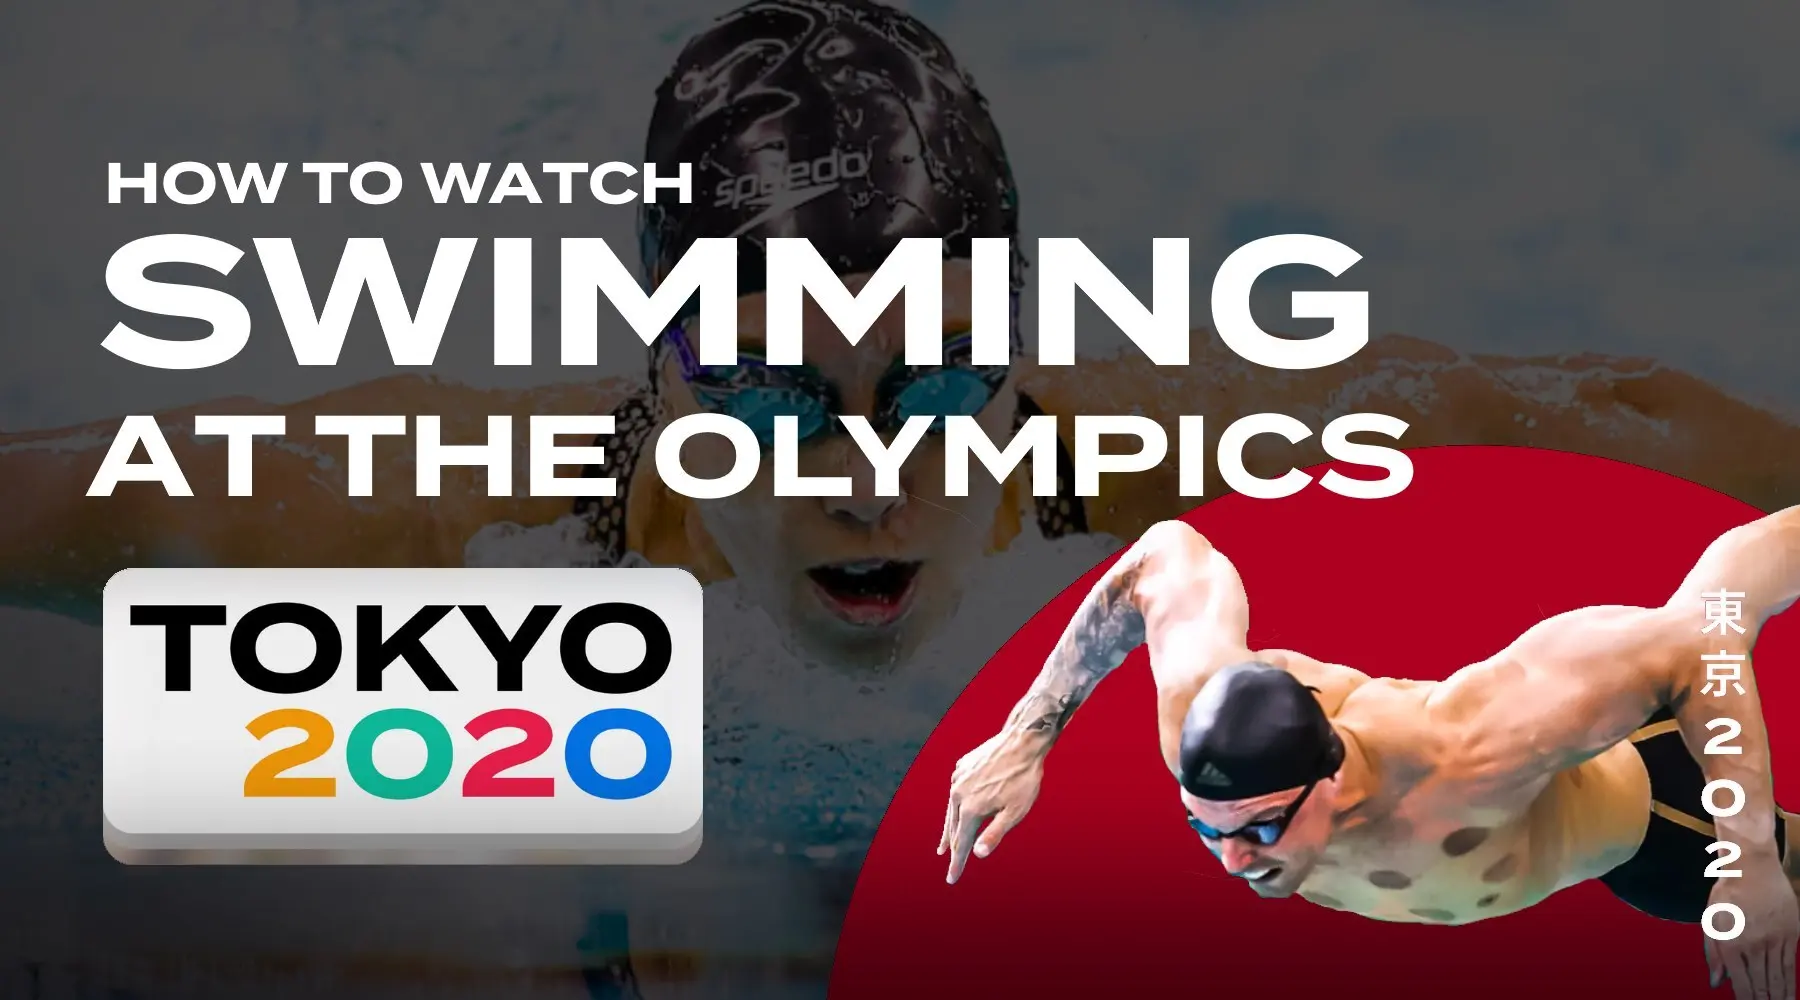  How to watch 2020 Tokyo Olympic Games swimming live online